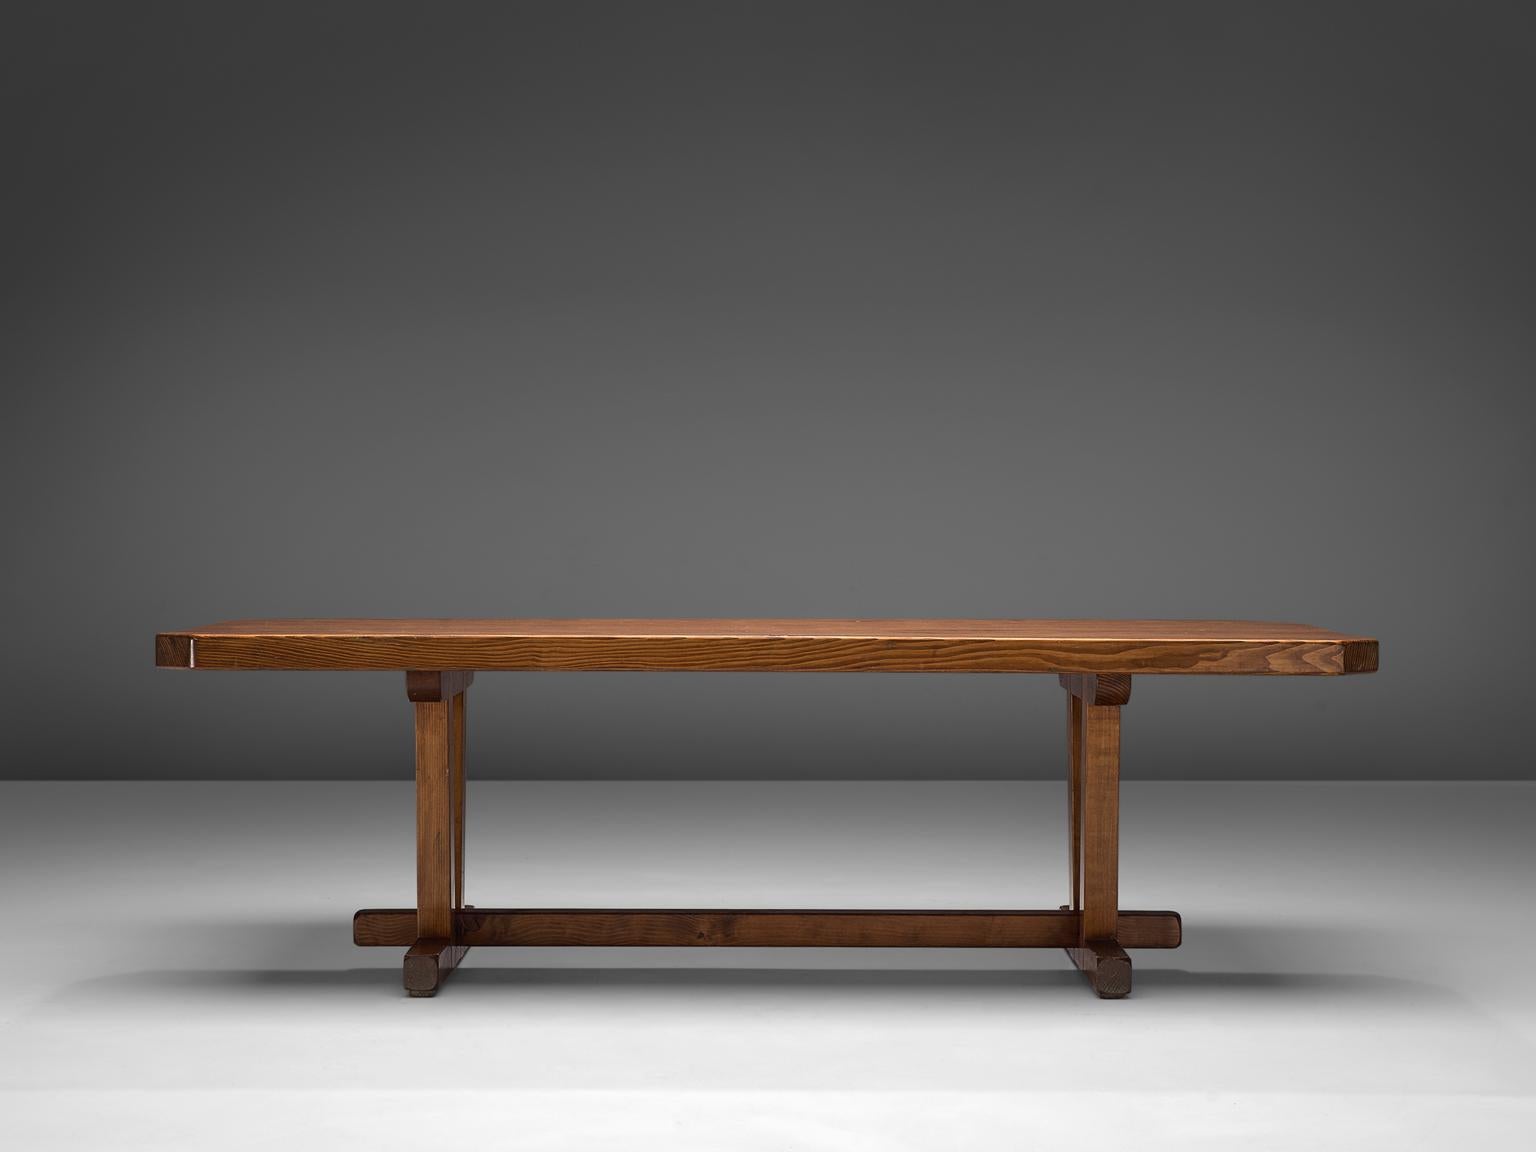 Dining table, made in pine, France, 1970s.

This rustic dining table made in pine has a natural feeling as the wood texture is very pronounced creating beautiful patterns all around the table. The legs are feature a notable construction. The